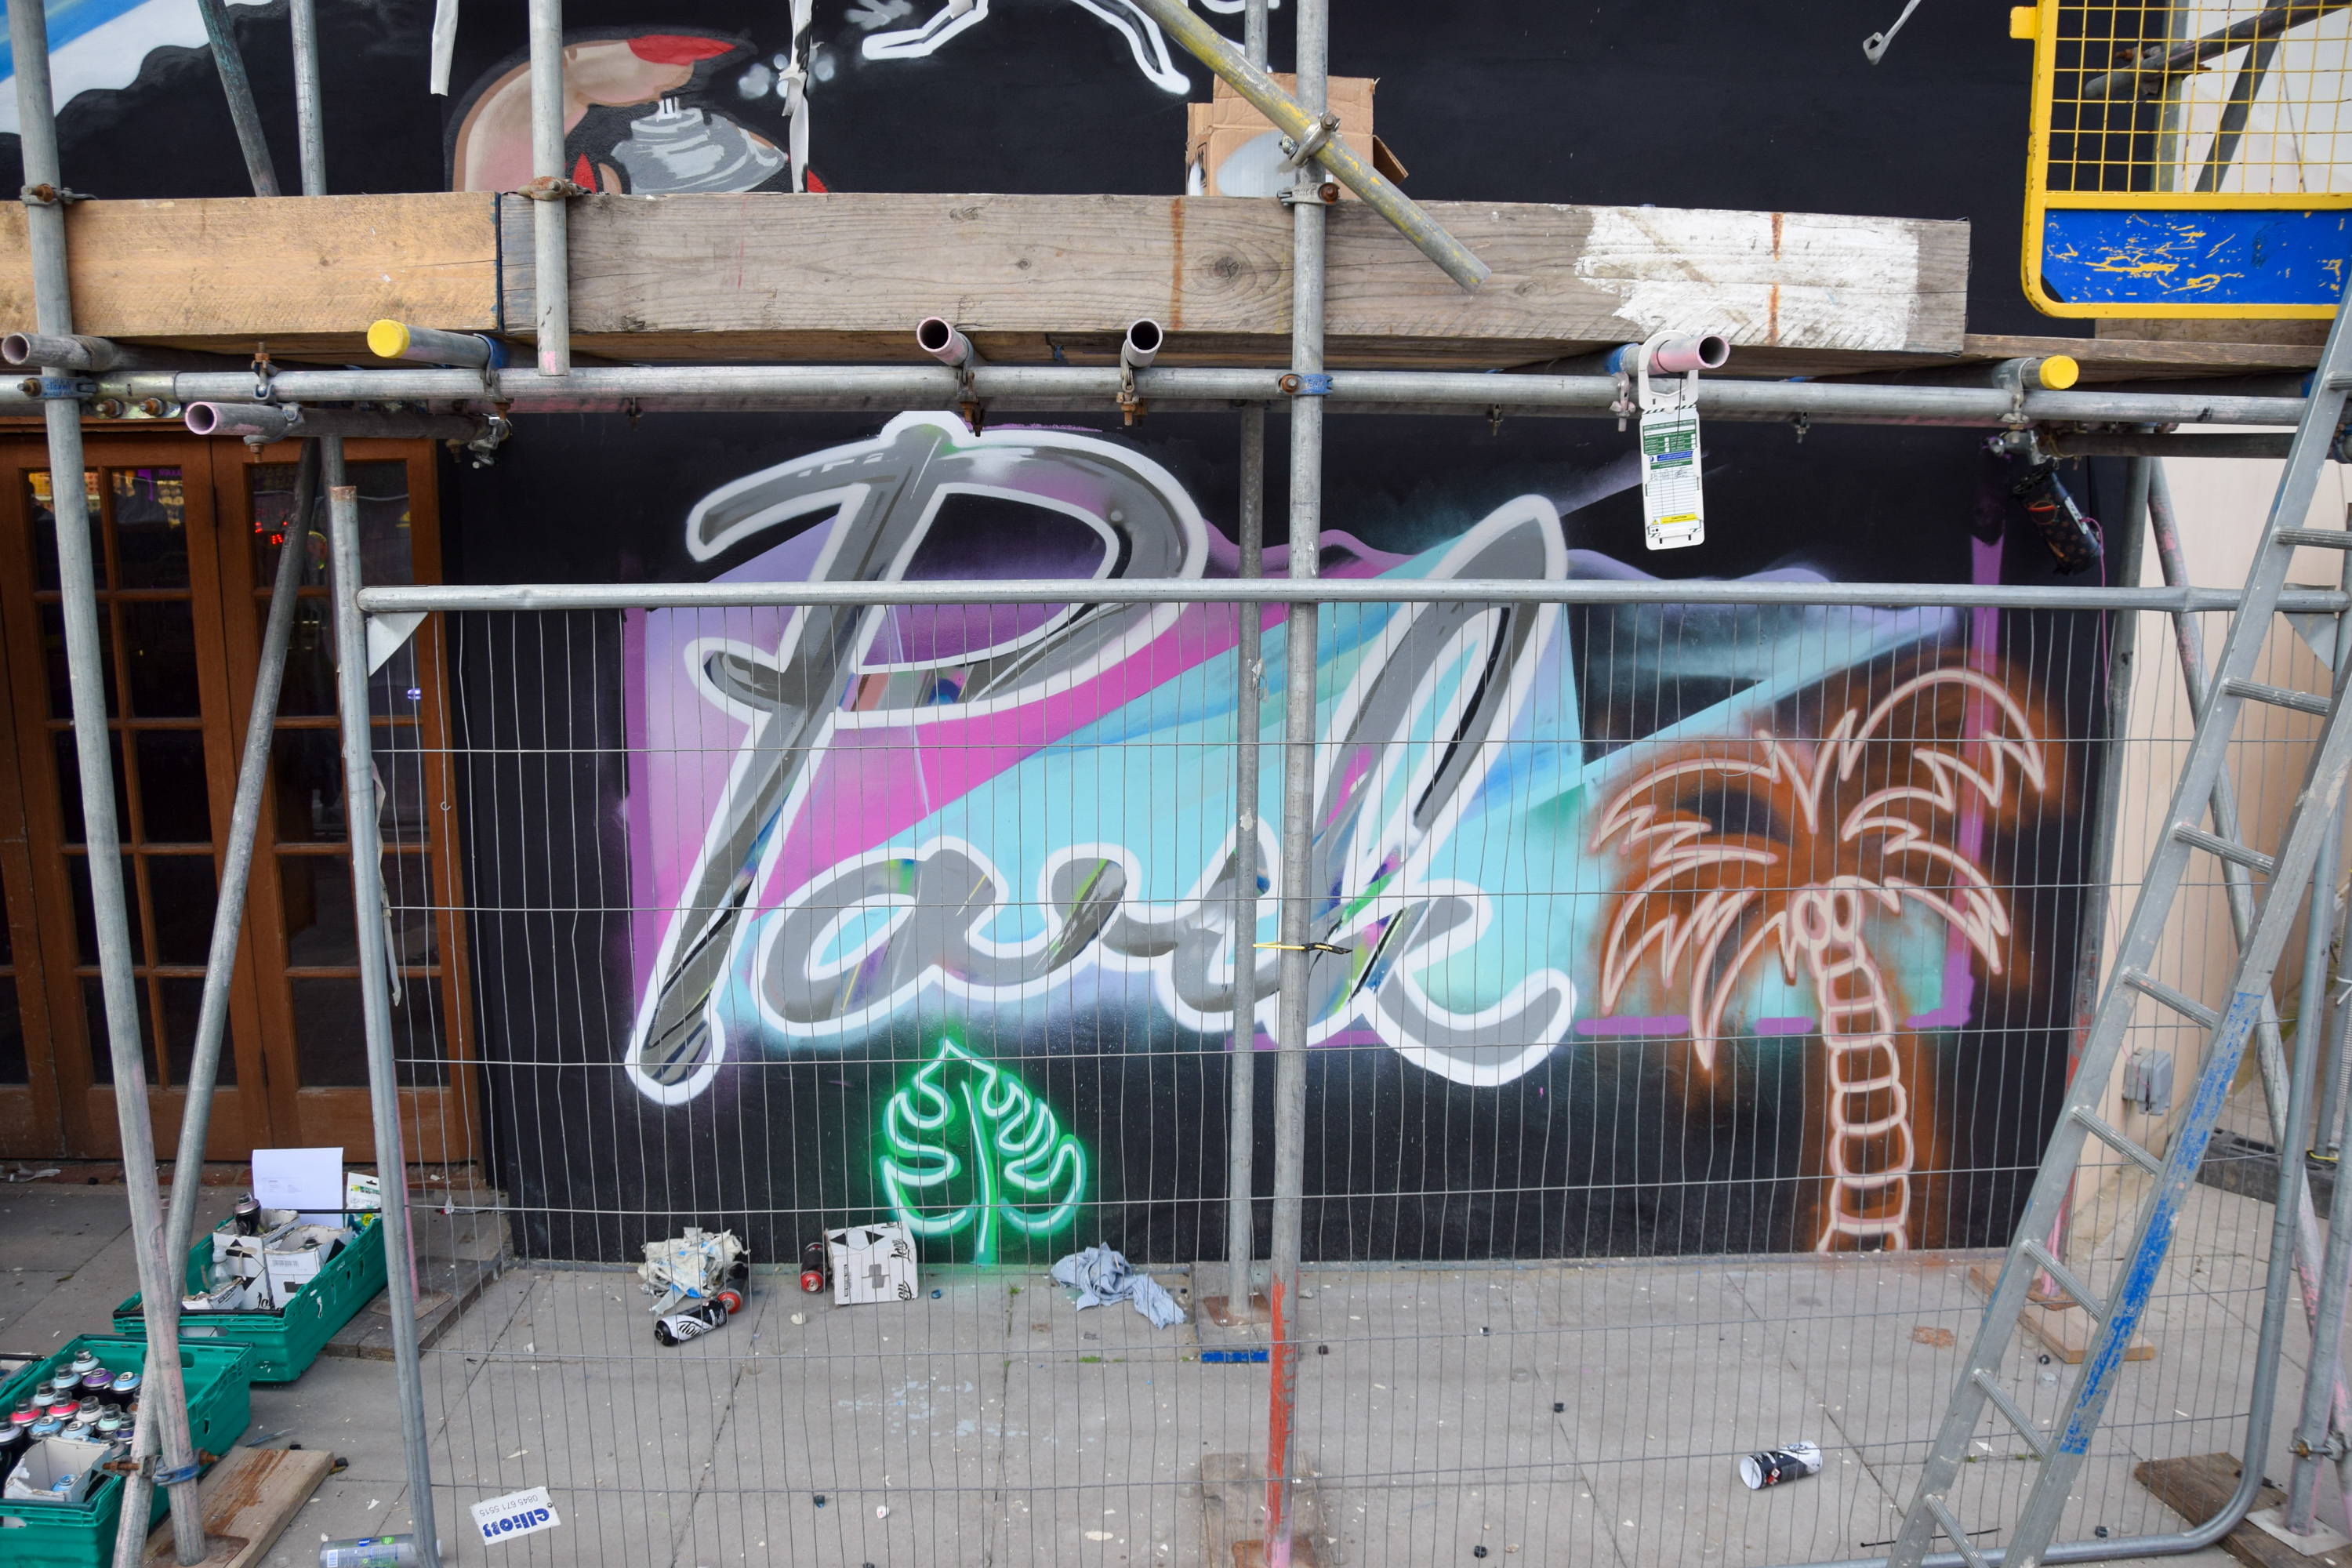 Thorpe Park Graffiti Wall Almost Complete